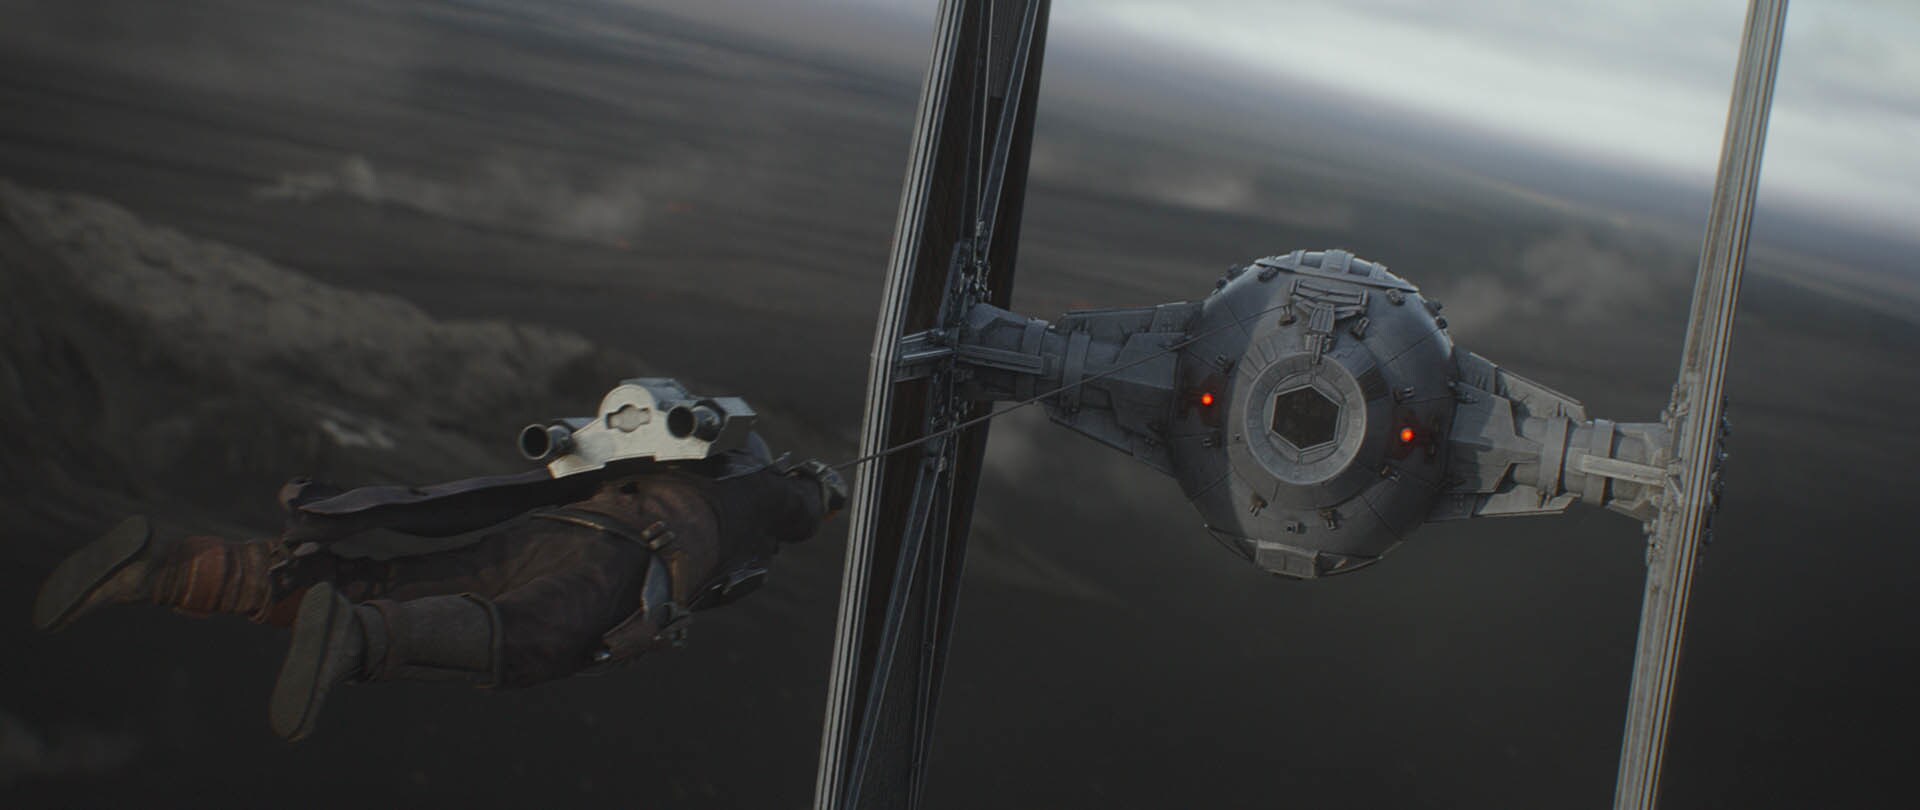 Finally, Moff Gideon arrives in a TIE fighter. Utilizing his jetpack for the first time, the Mand...